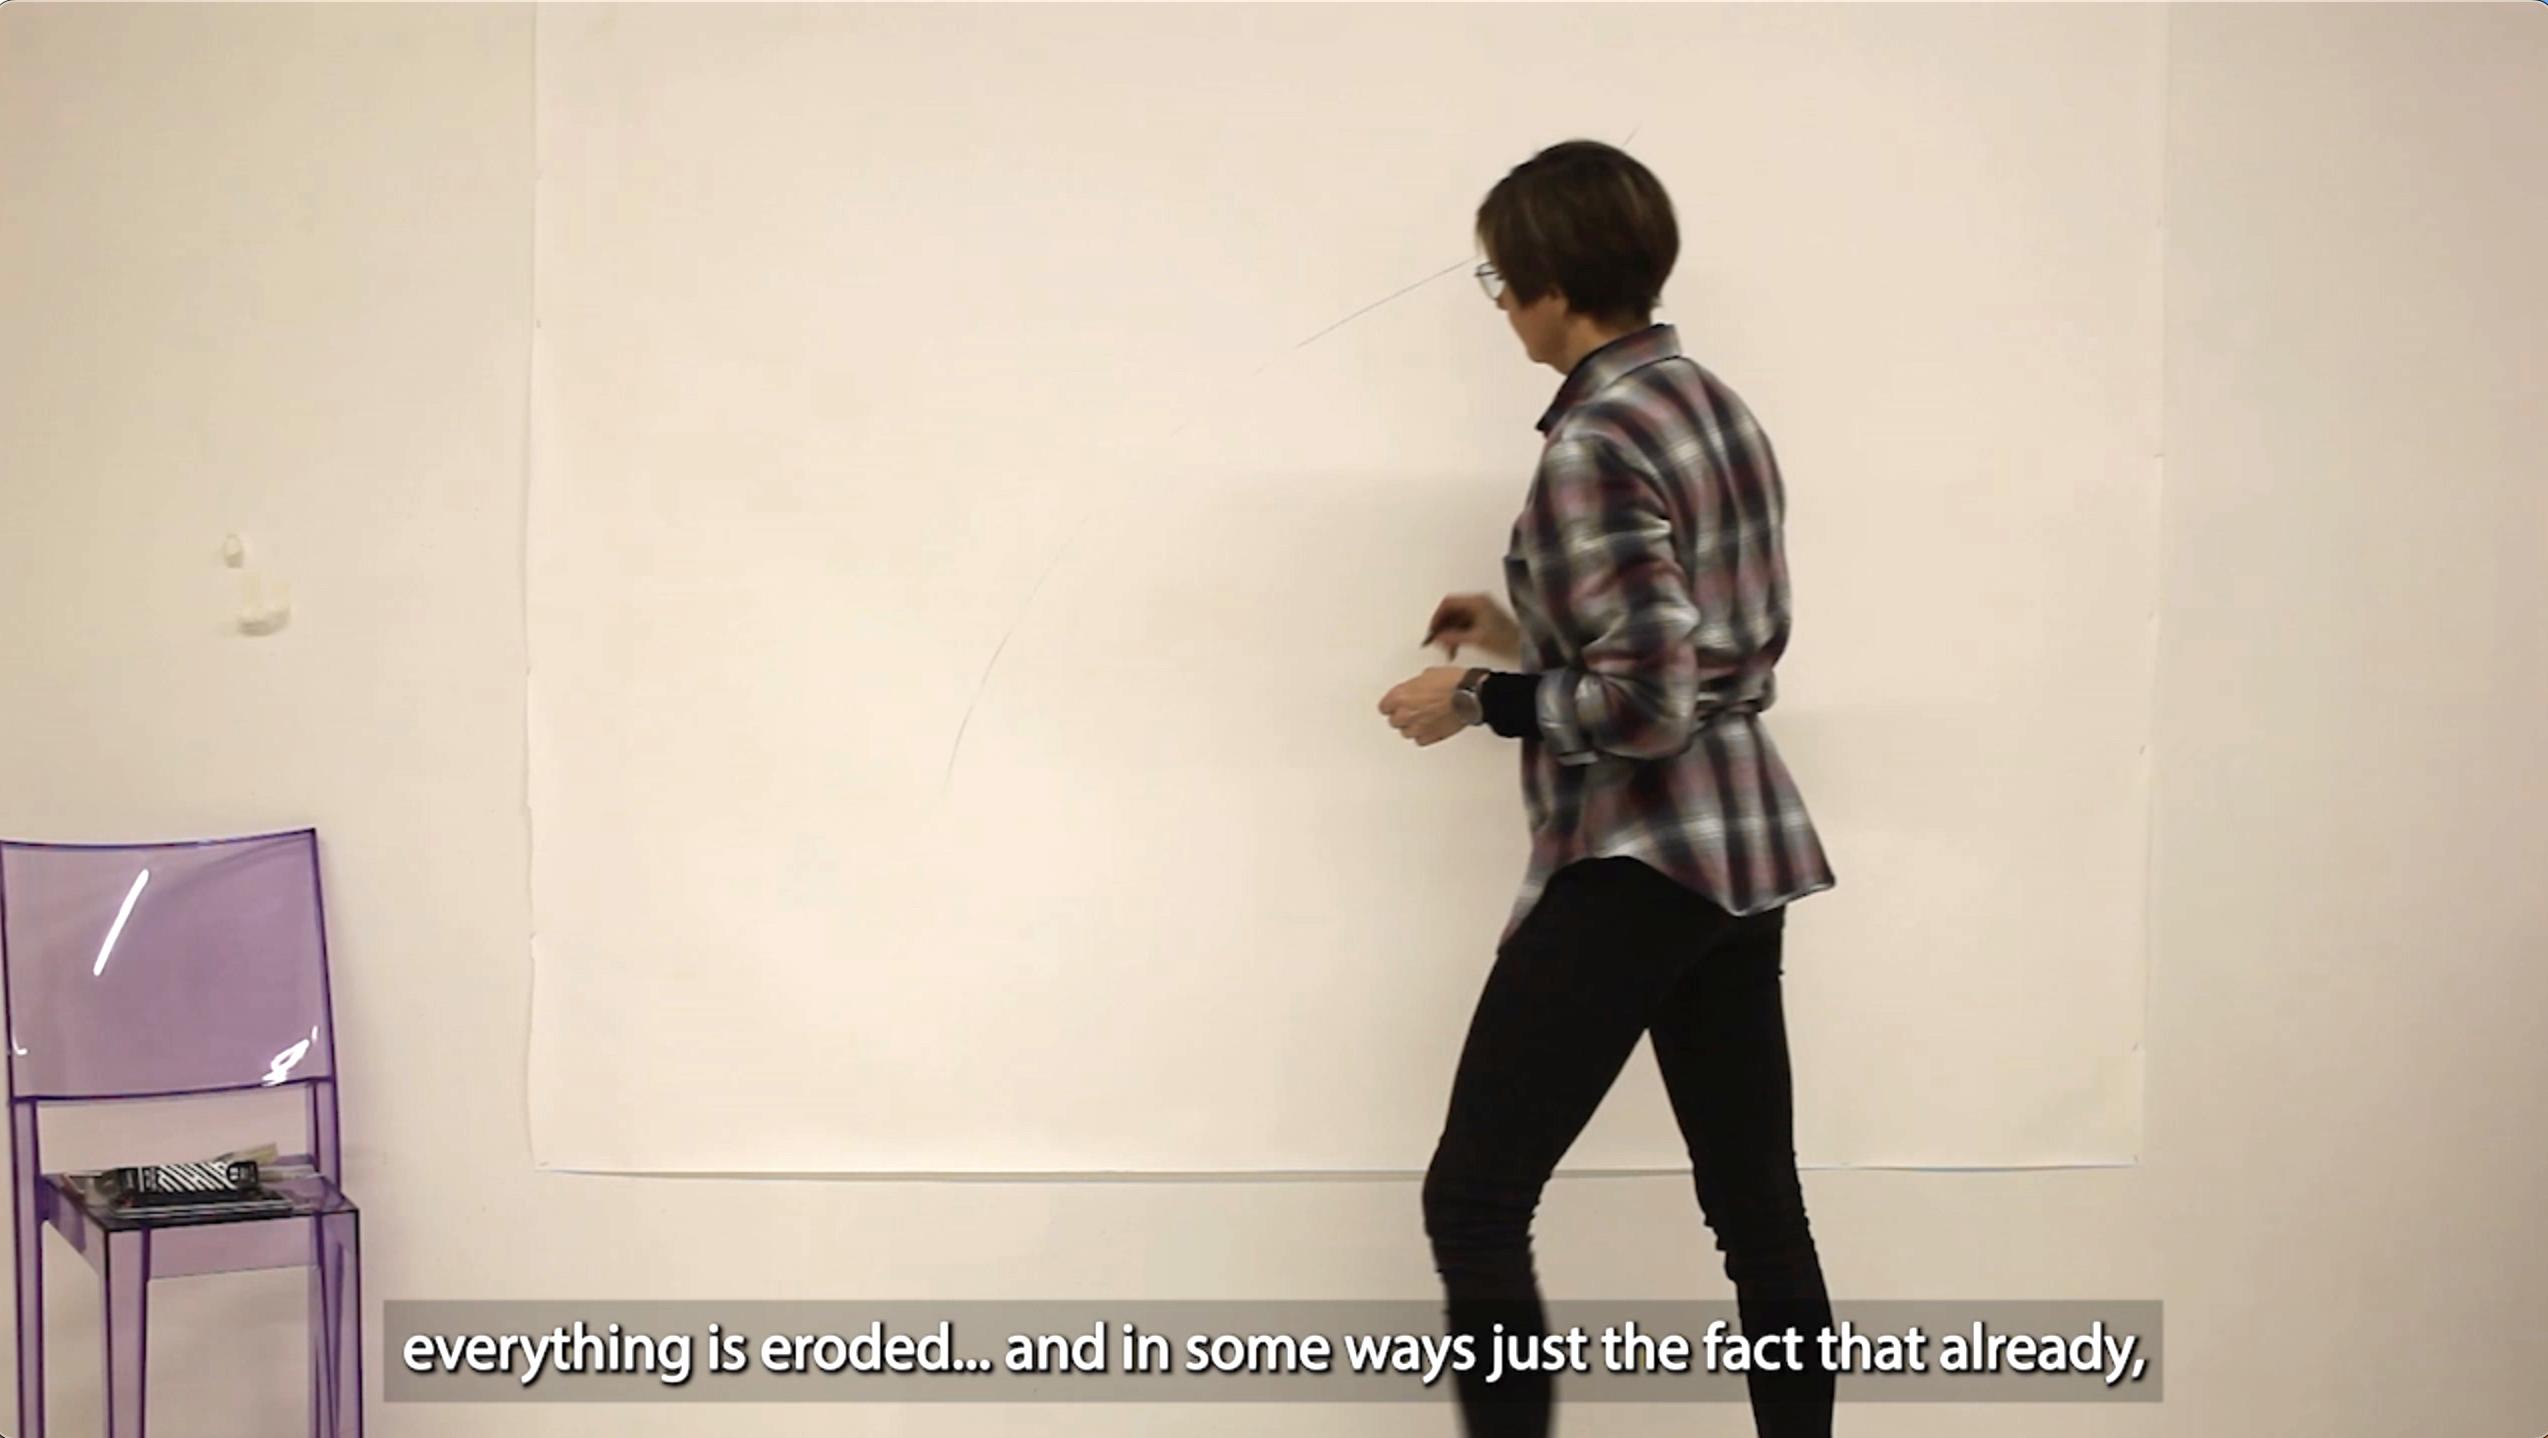 A still from a video where a person is standing next to a white wall with a large paper in it. The person is wearing a purple flannel shirt and black jeans.